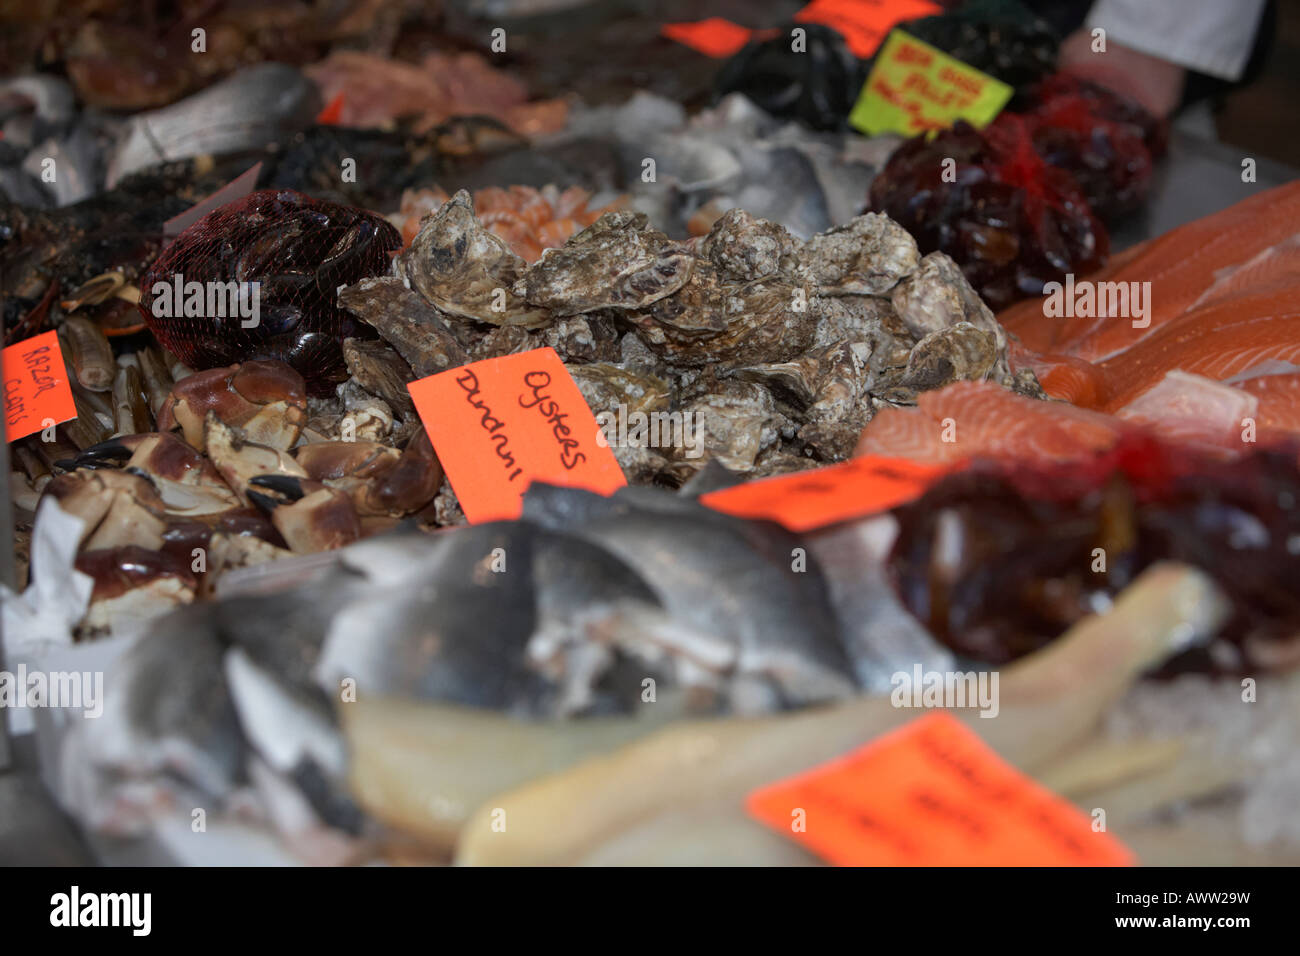 fresh shellfish including dundrum bay oysters on a fishmongers fresh fish stall at an indoor market Stock Photo